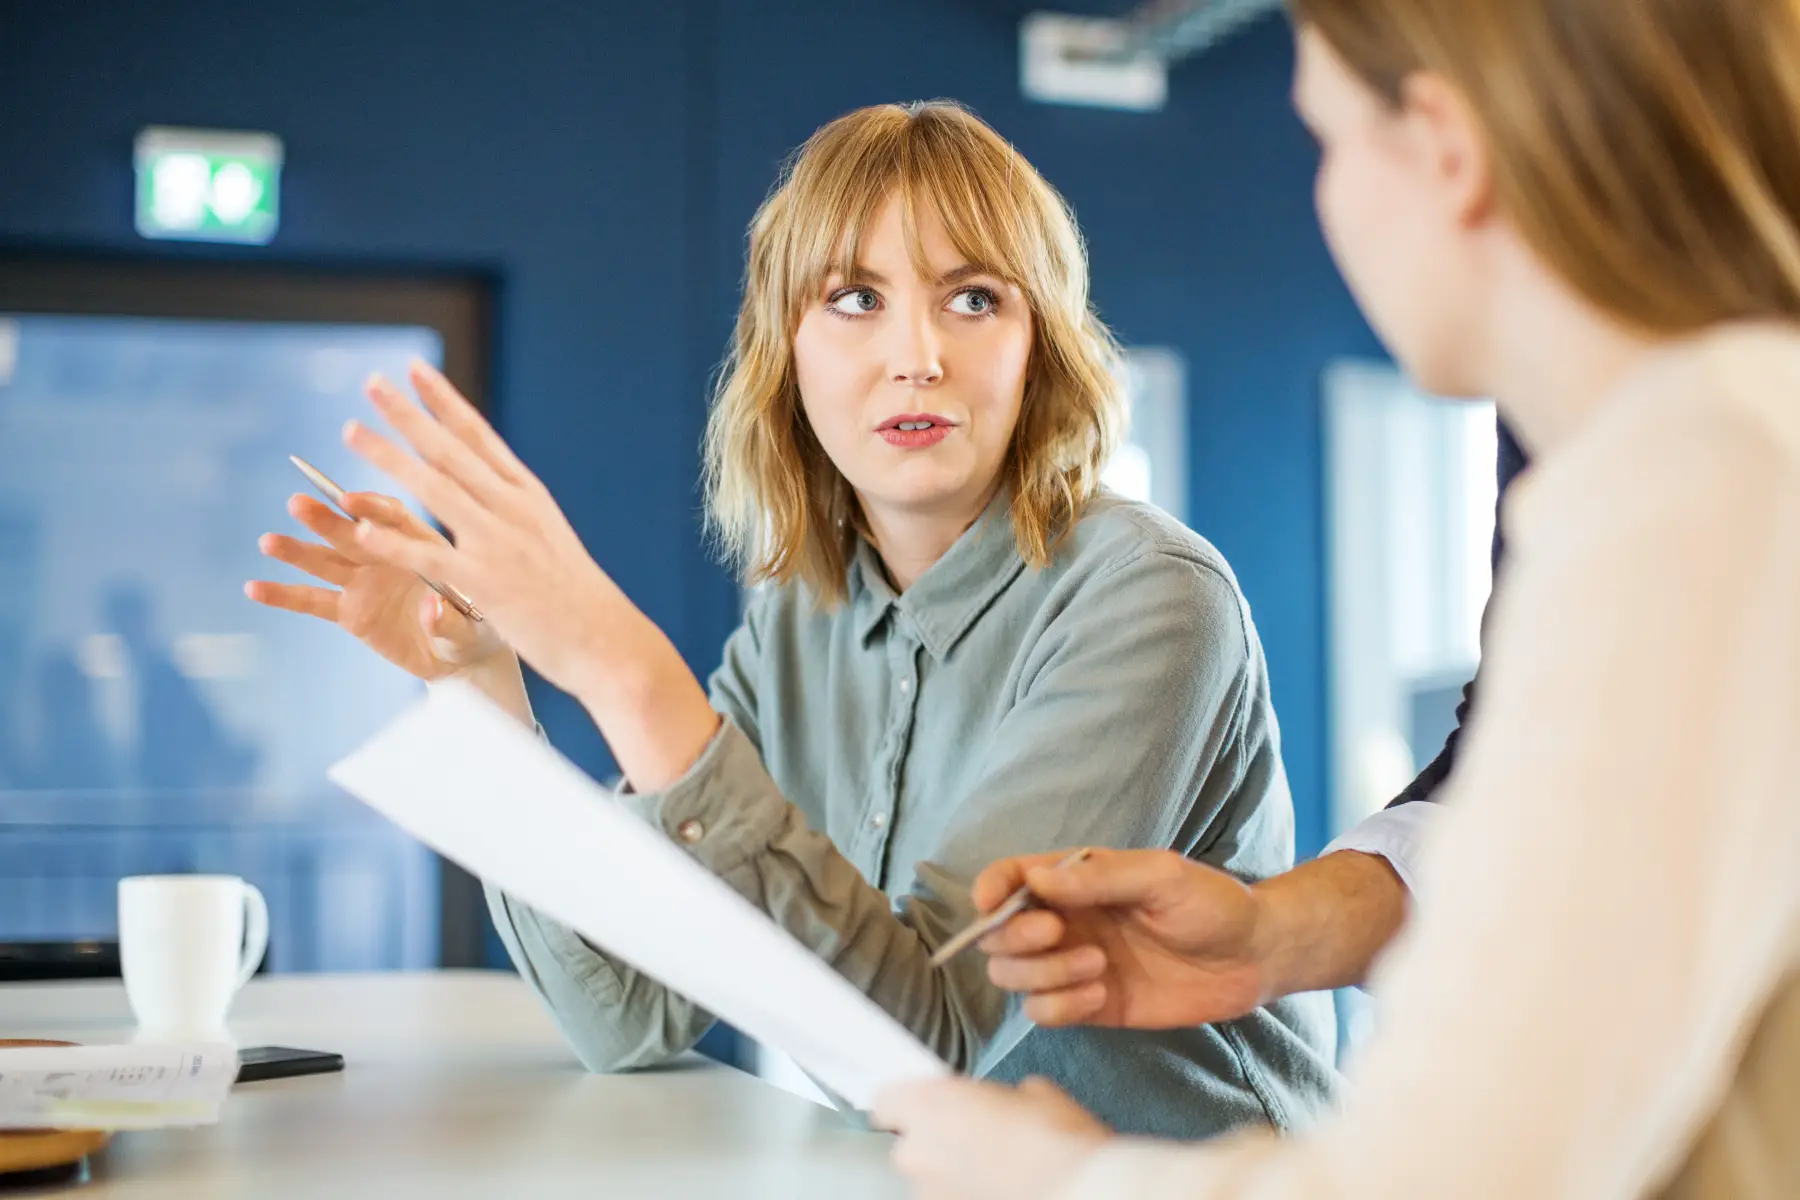 Woman discussing and using hand gestures during one-on-one meeting